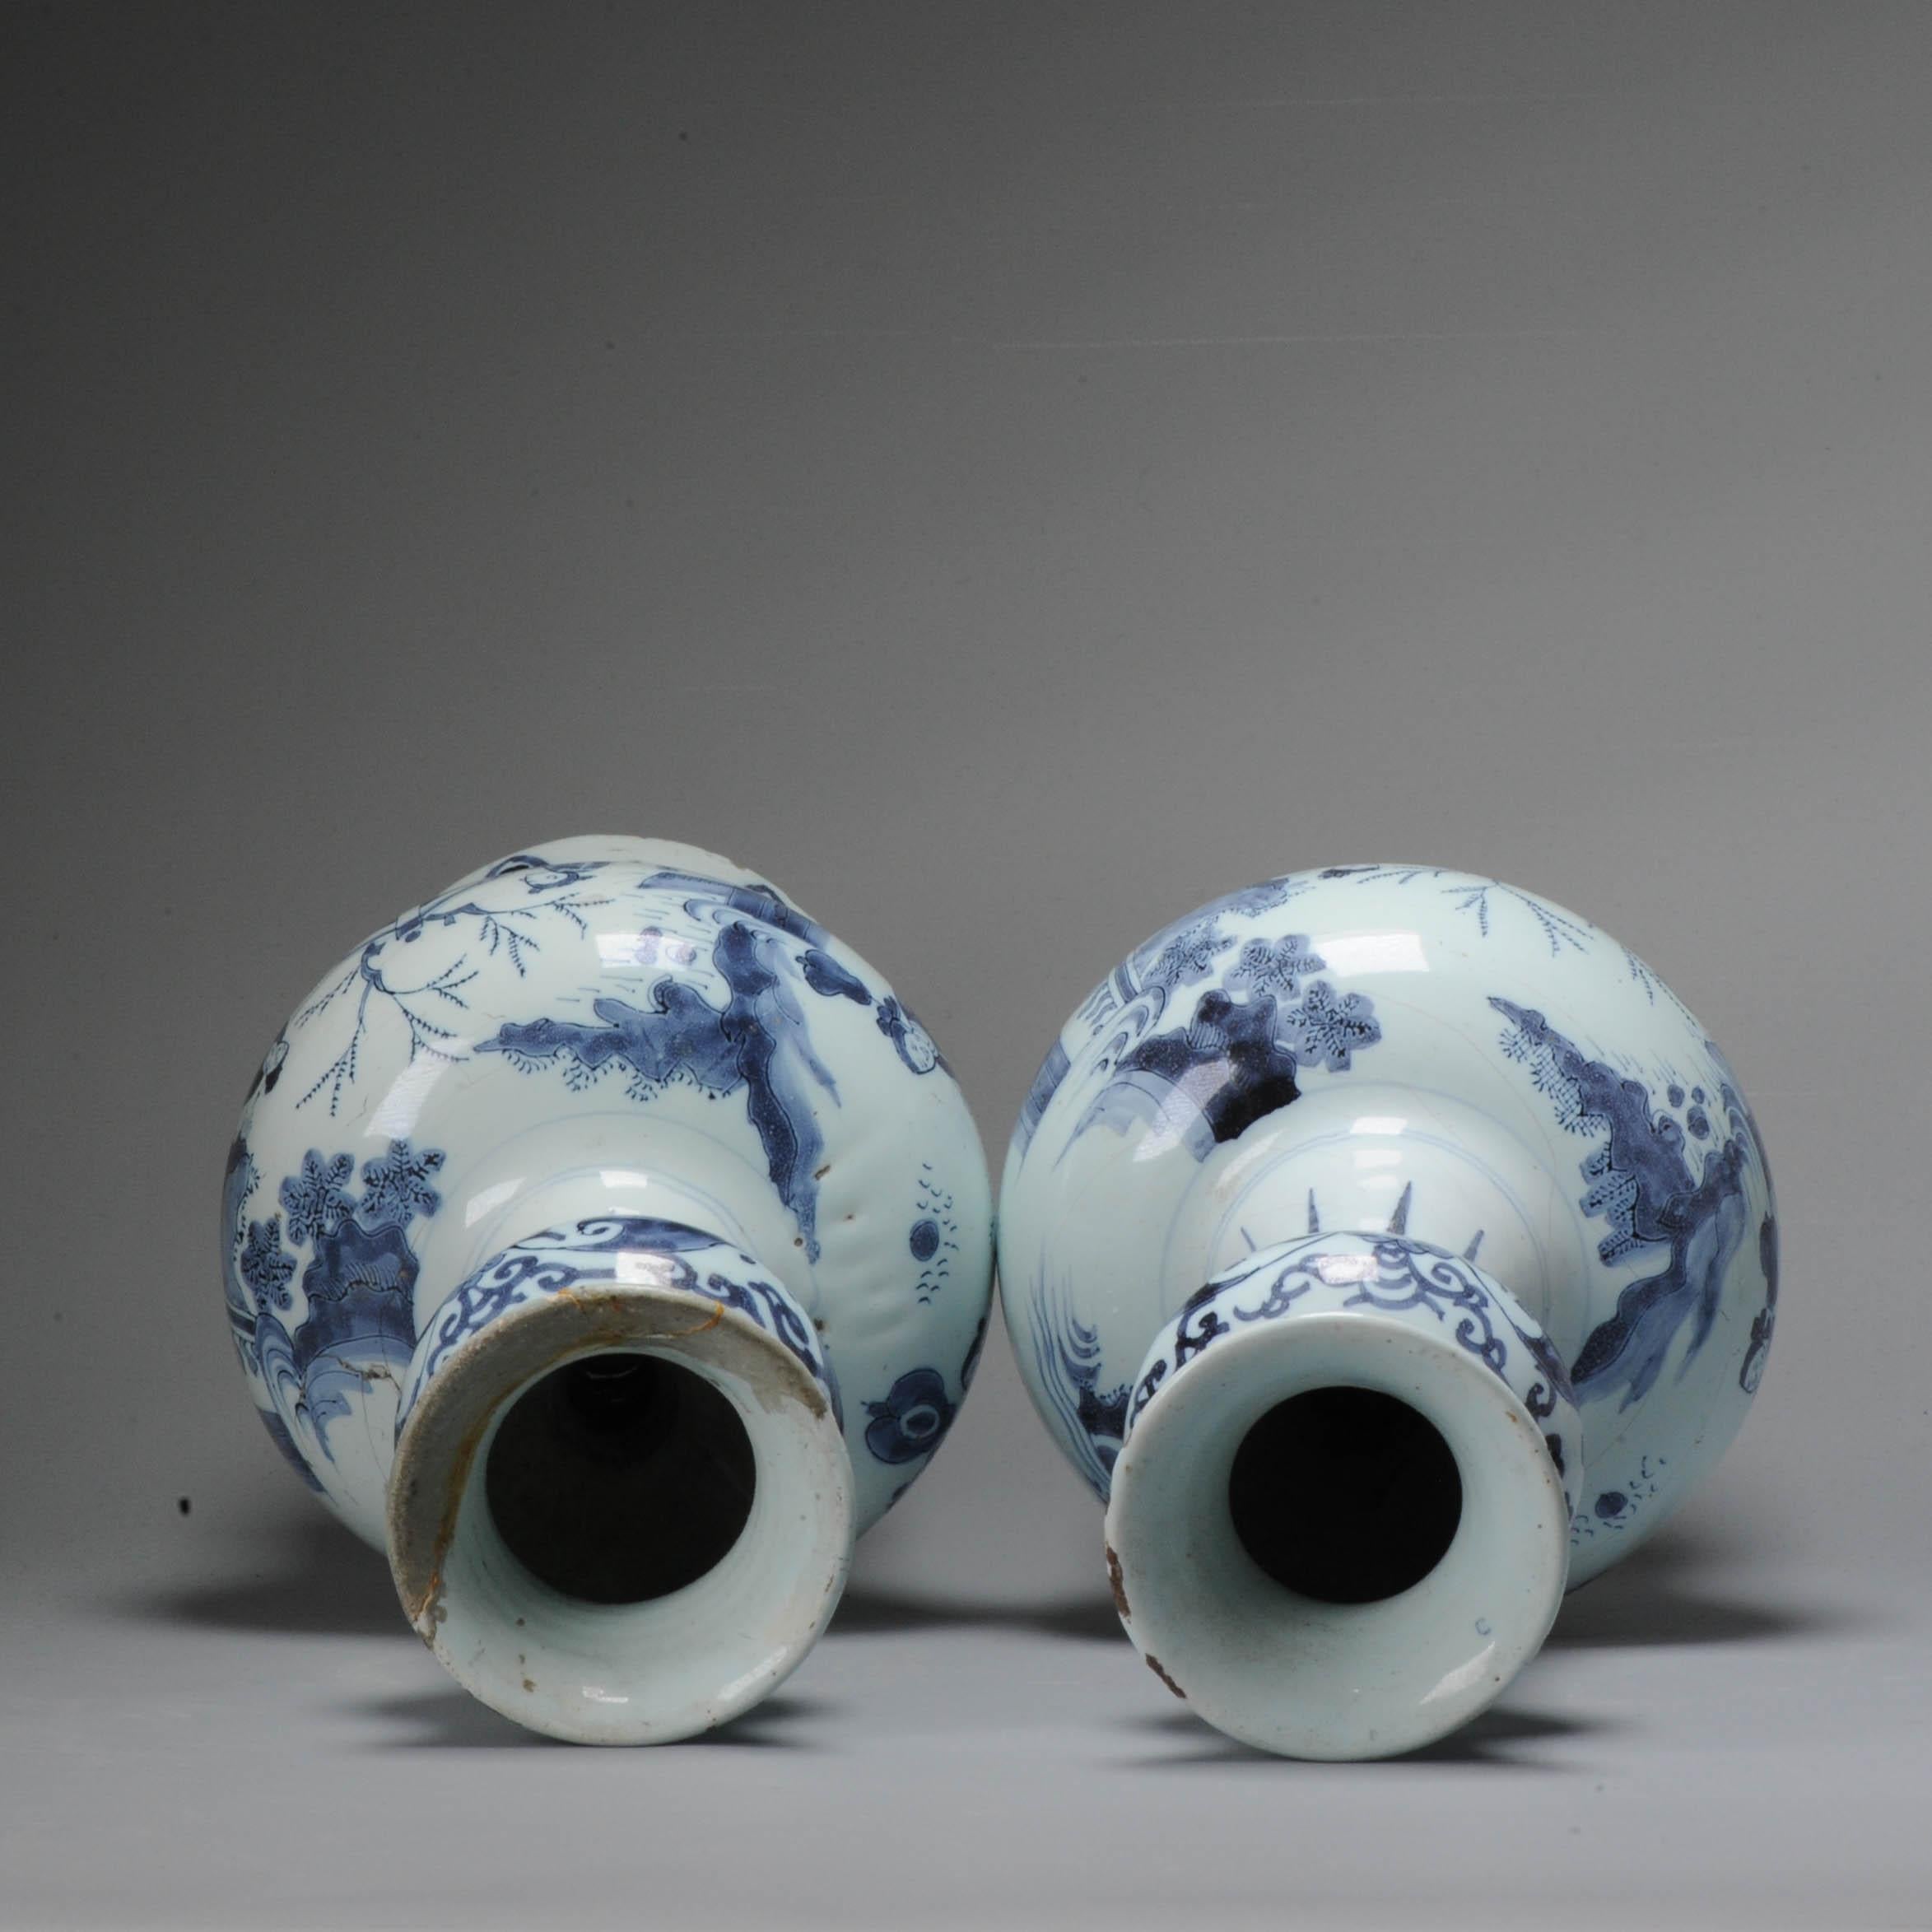 Unusual Dutch Delftware Figural Earthenware Vases in Chinese Transitional Style For Sale 4